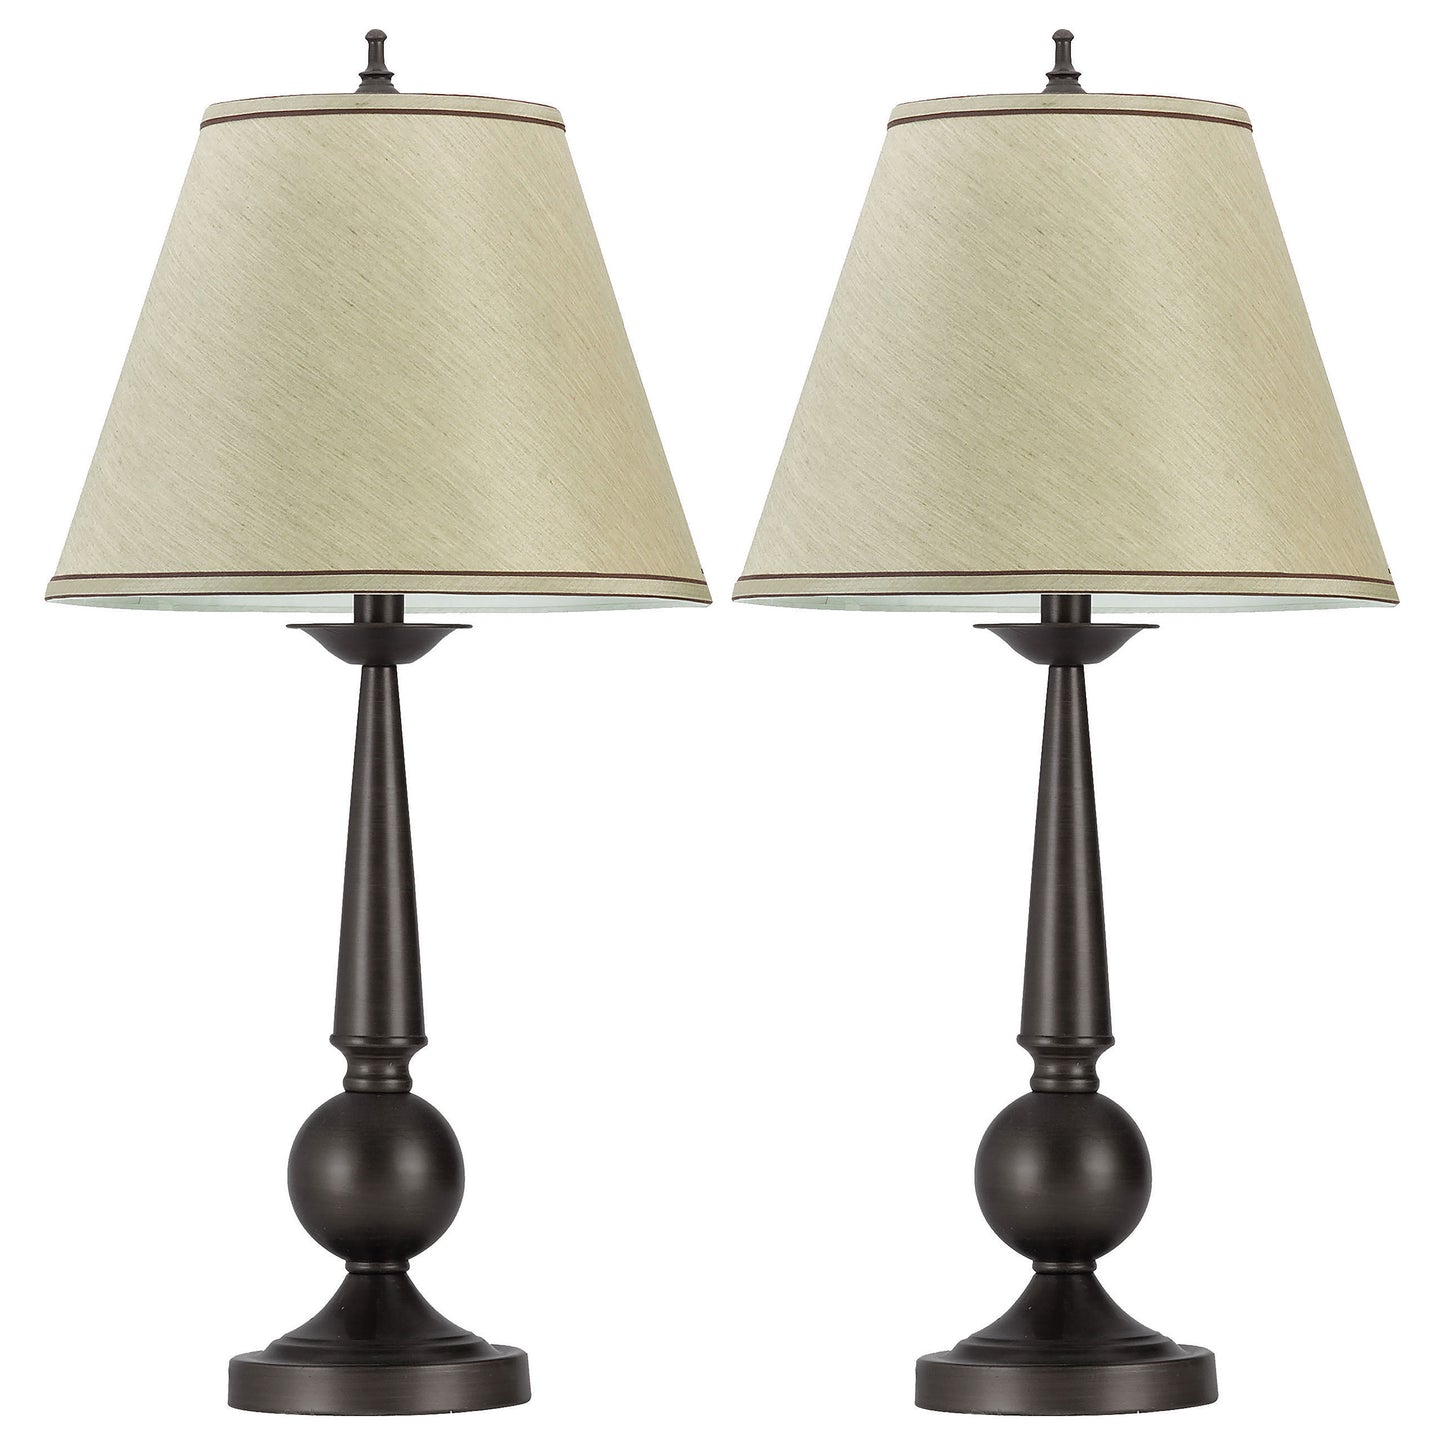 Ochanko Cone shade Table Lamps Bronze and Beige (Set of 2)